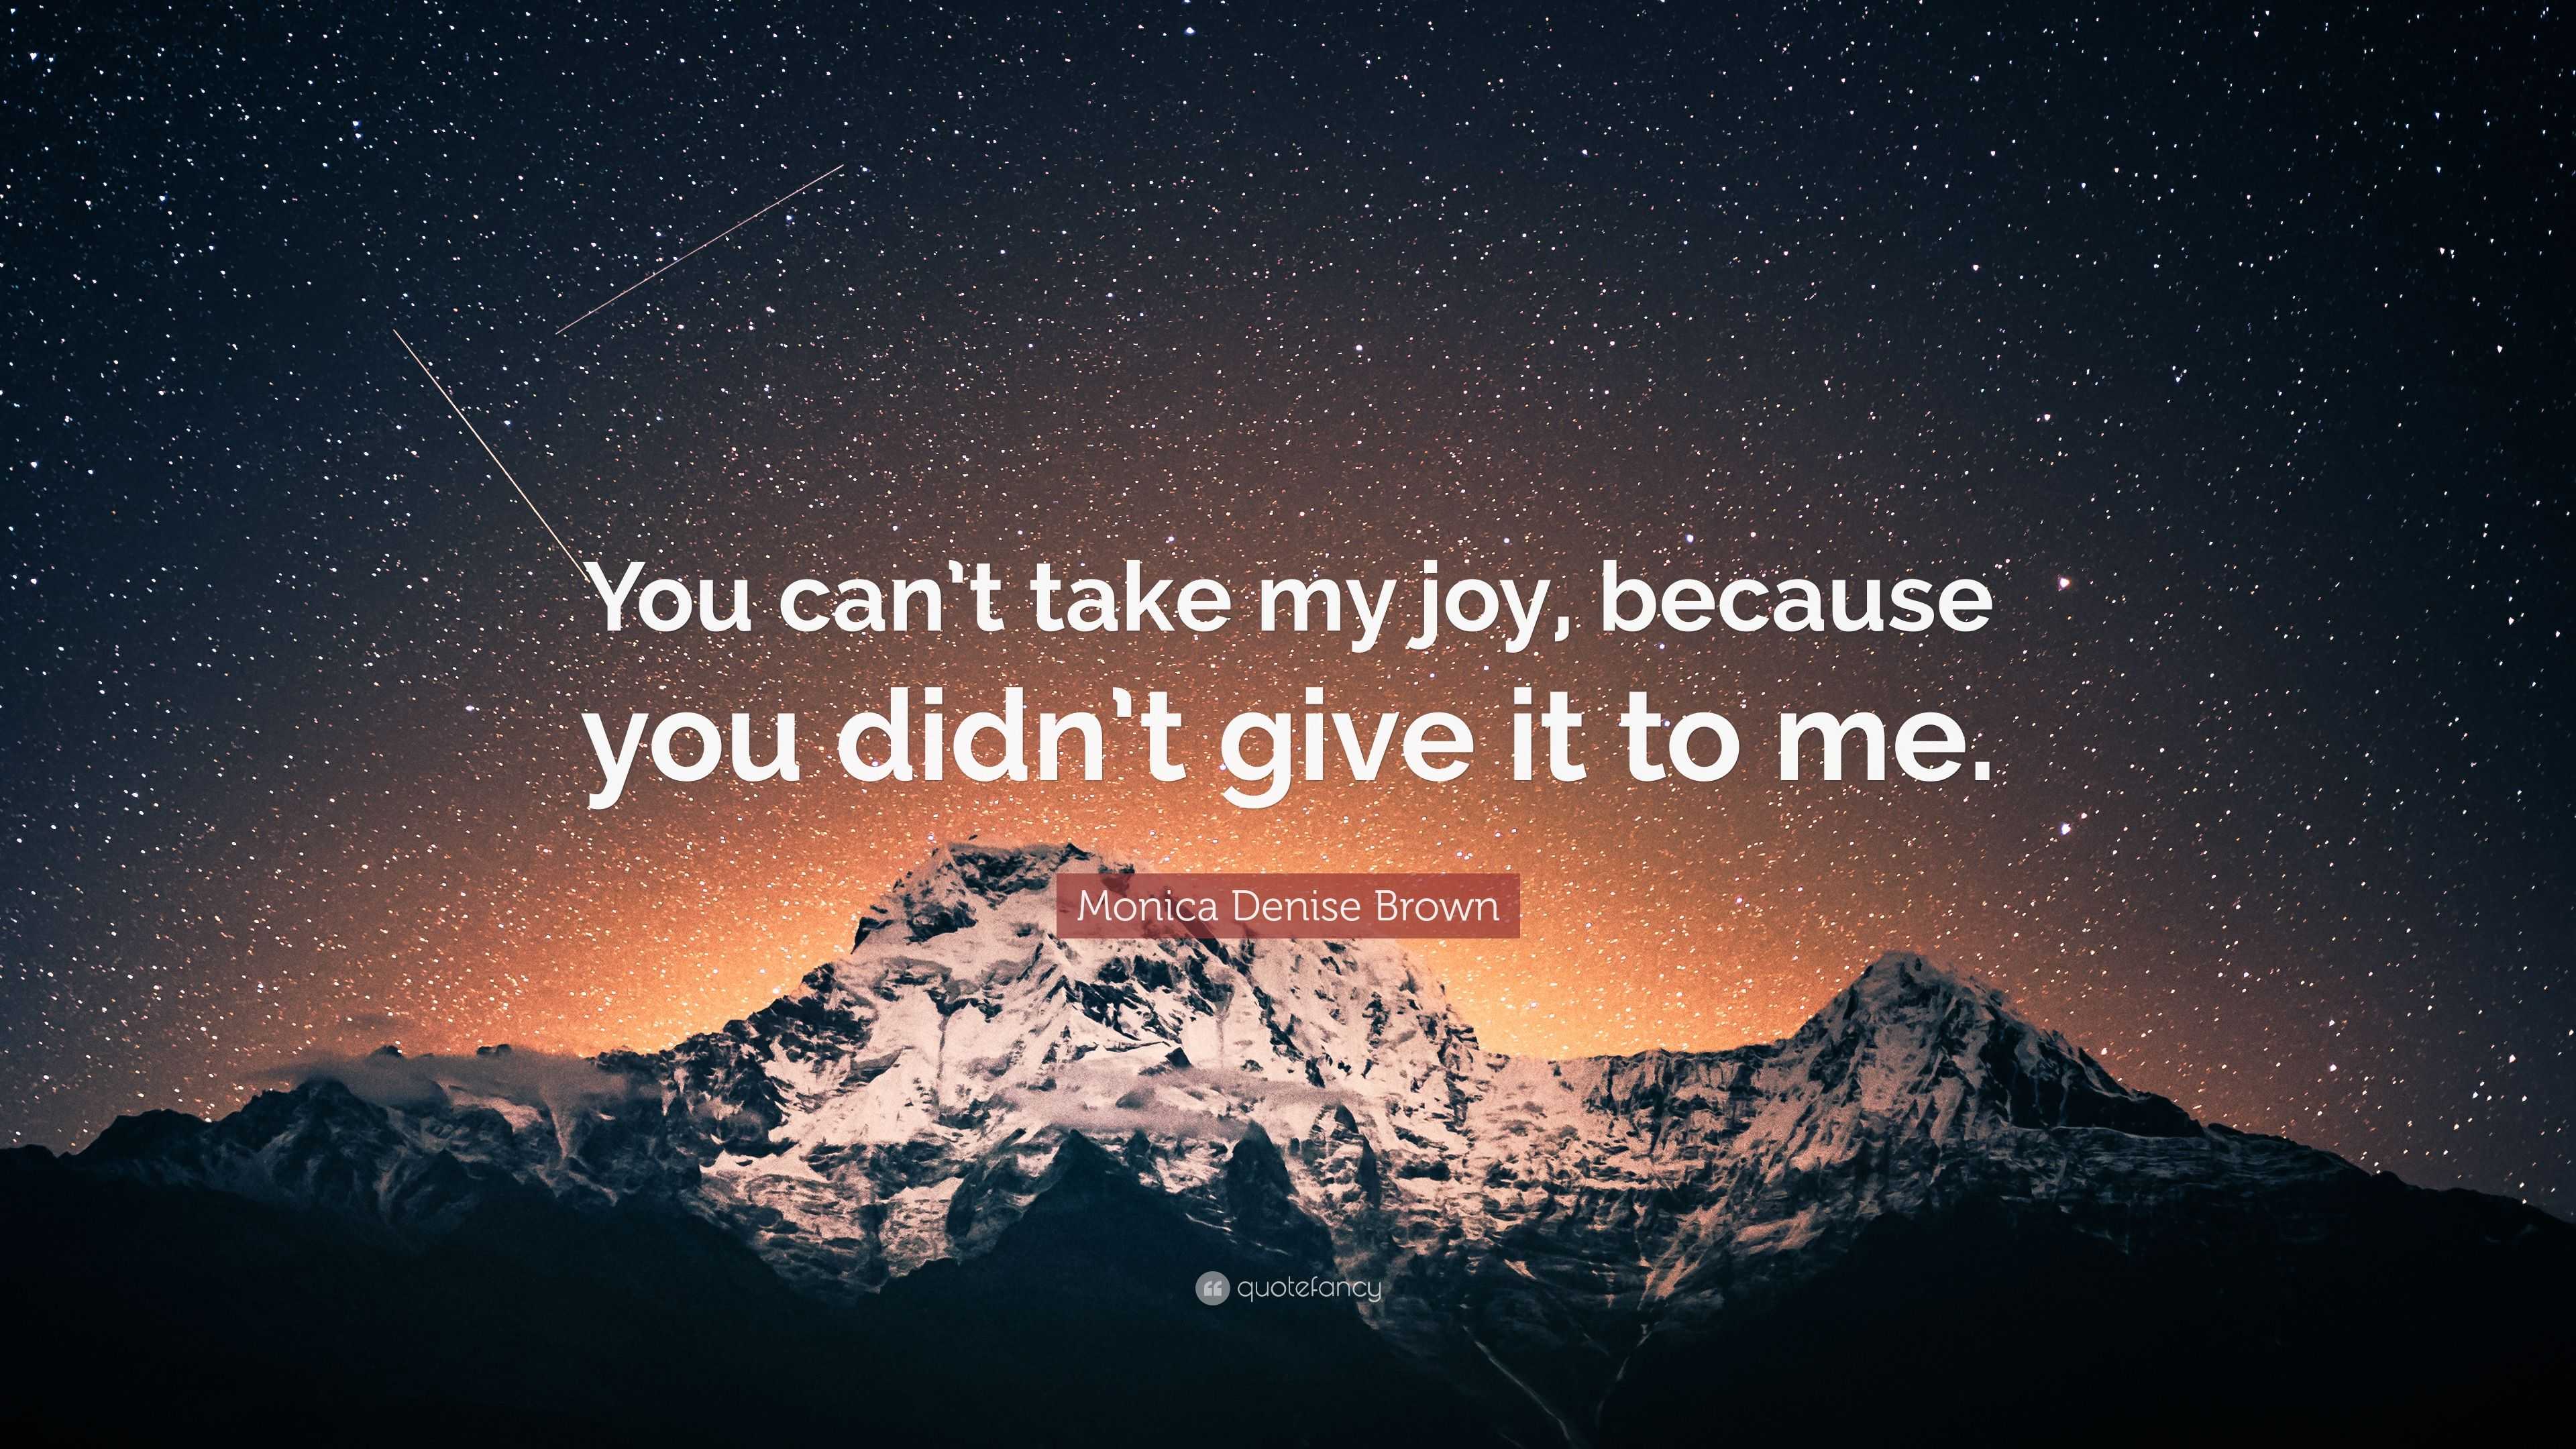 Monica Denise Brown Quote: “You can’t take my joy, because you didn’t ...